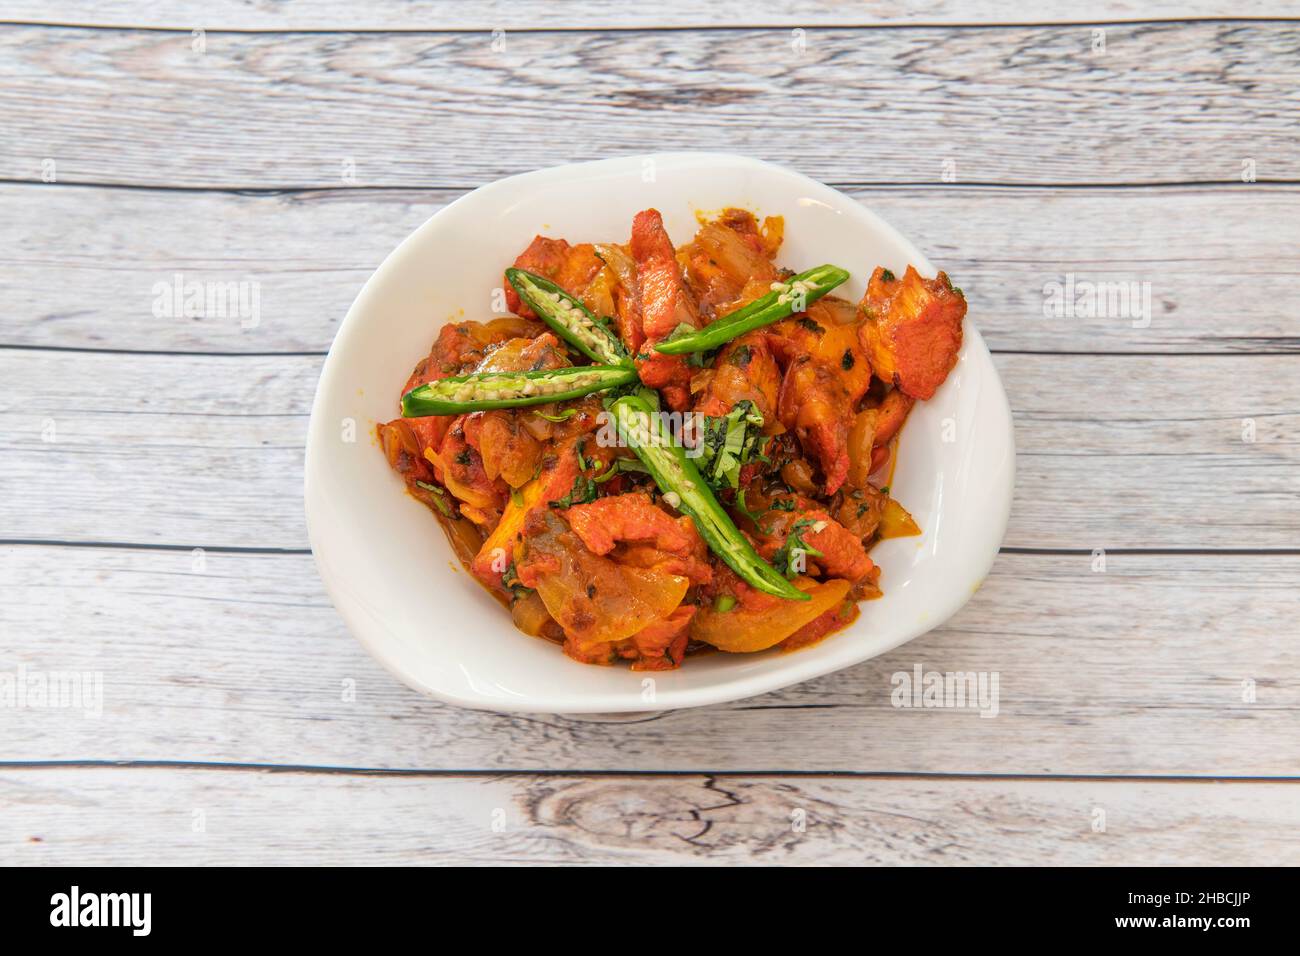 Jalfrezi means quick fry, born as a spicy dish from the British Raj era, cooked with chicken, bell peppers, onions, green chilies, it is now one of th Stock Photo